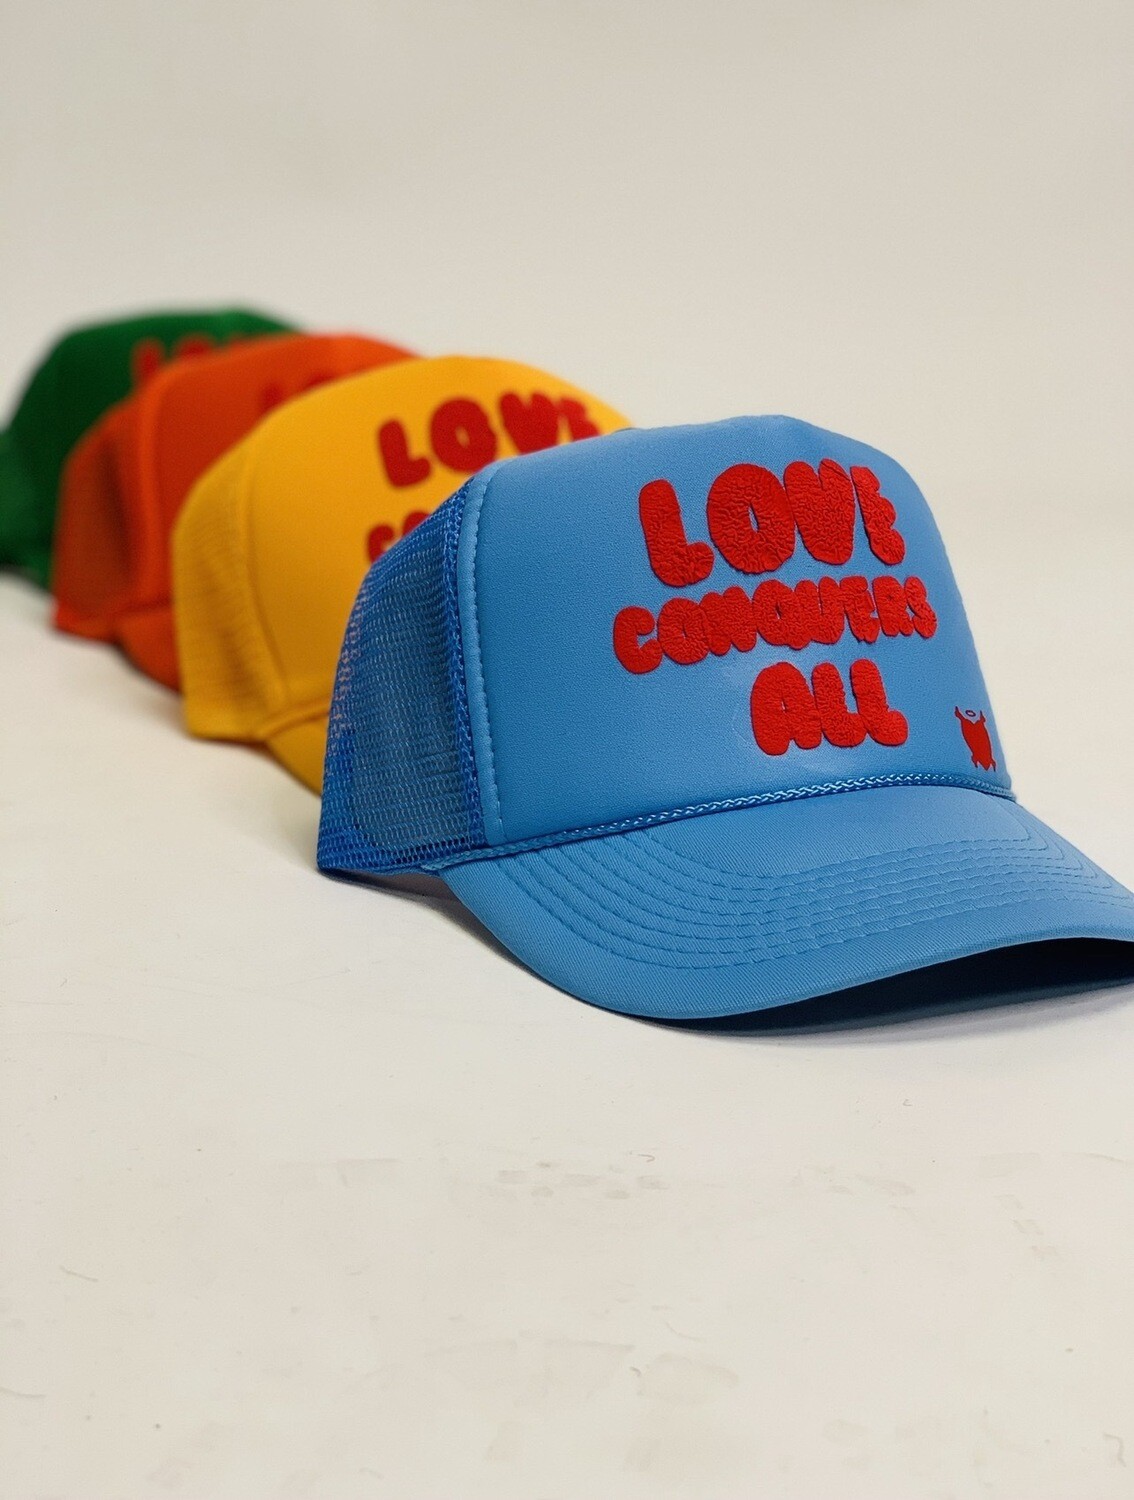 “Love Conquers All” Trucker Hats